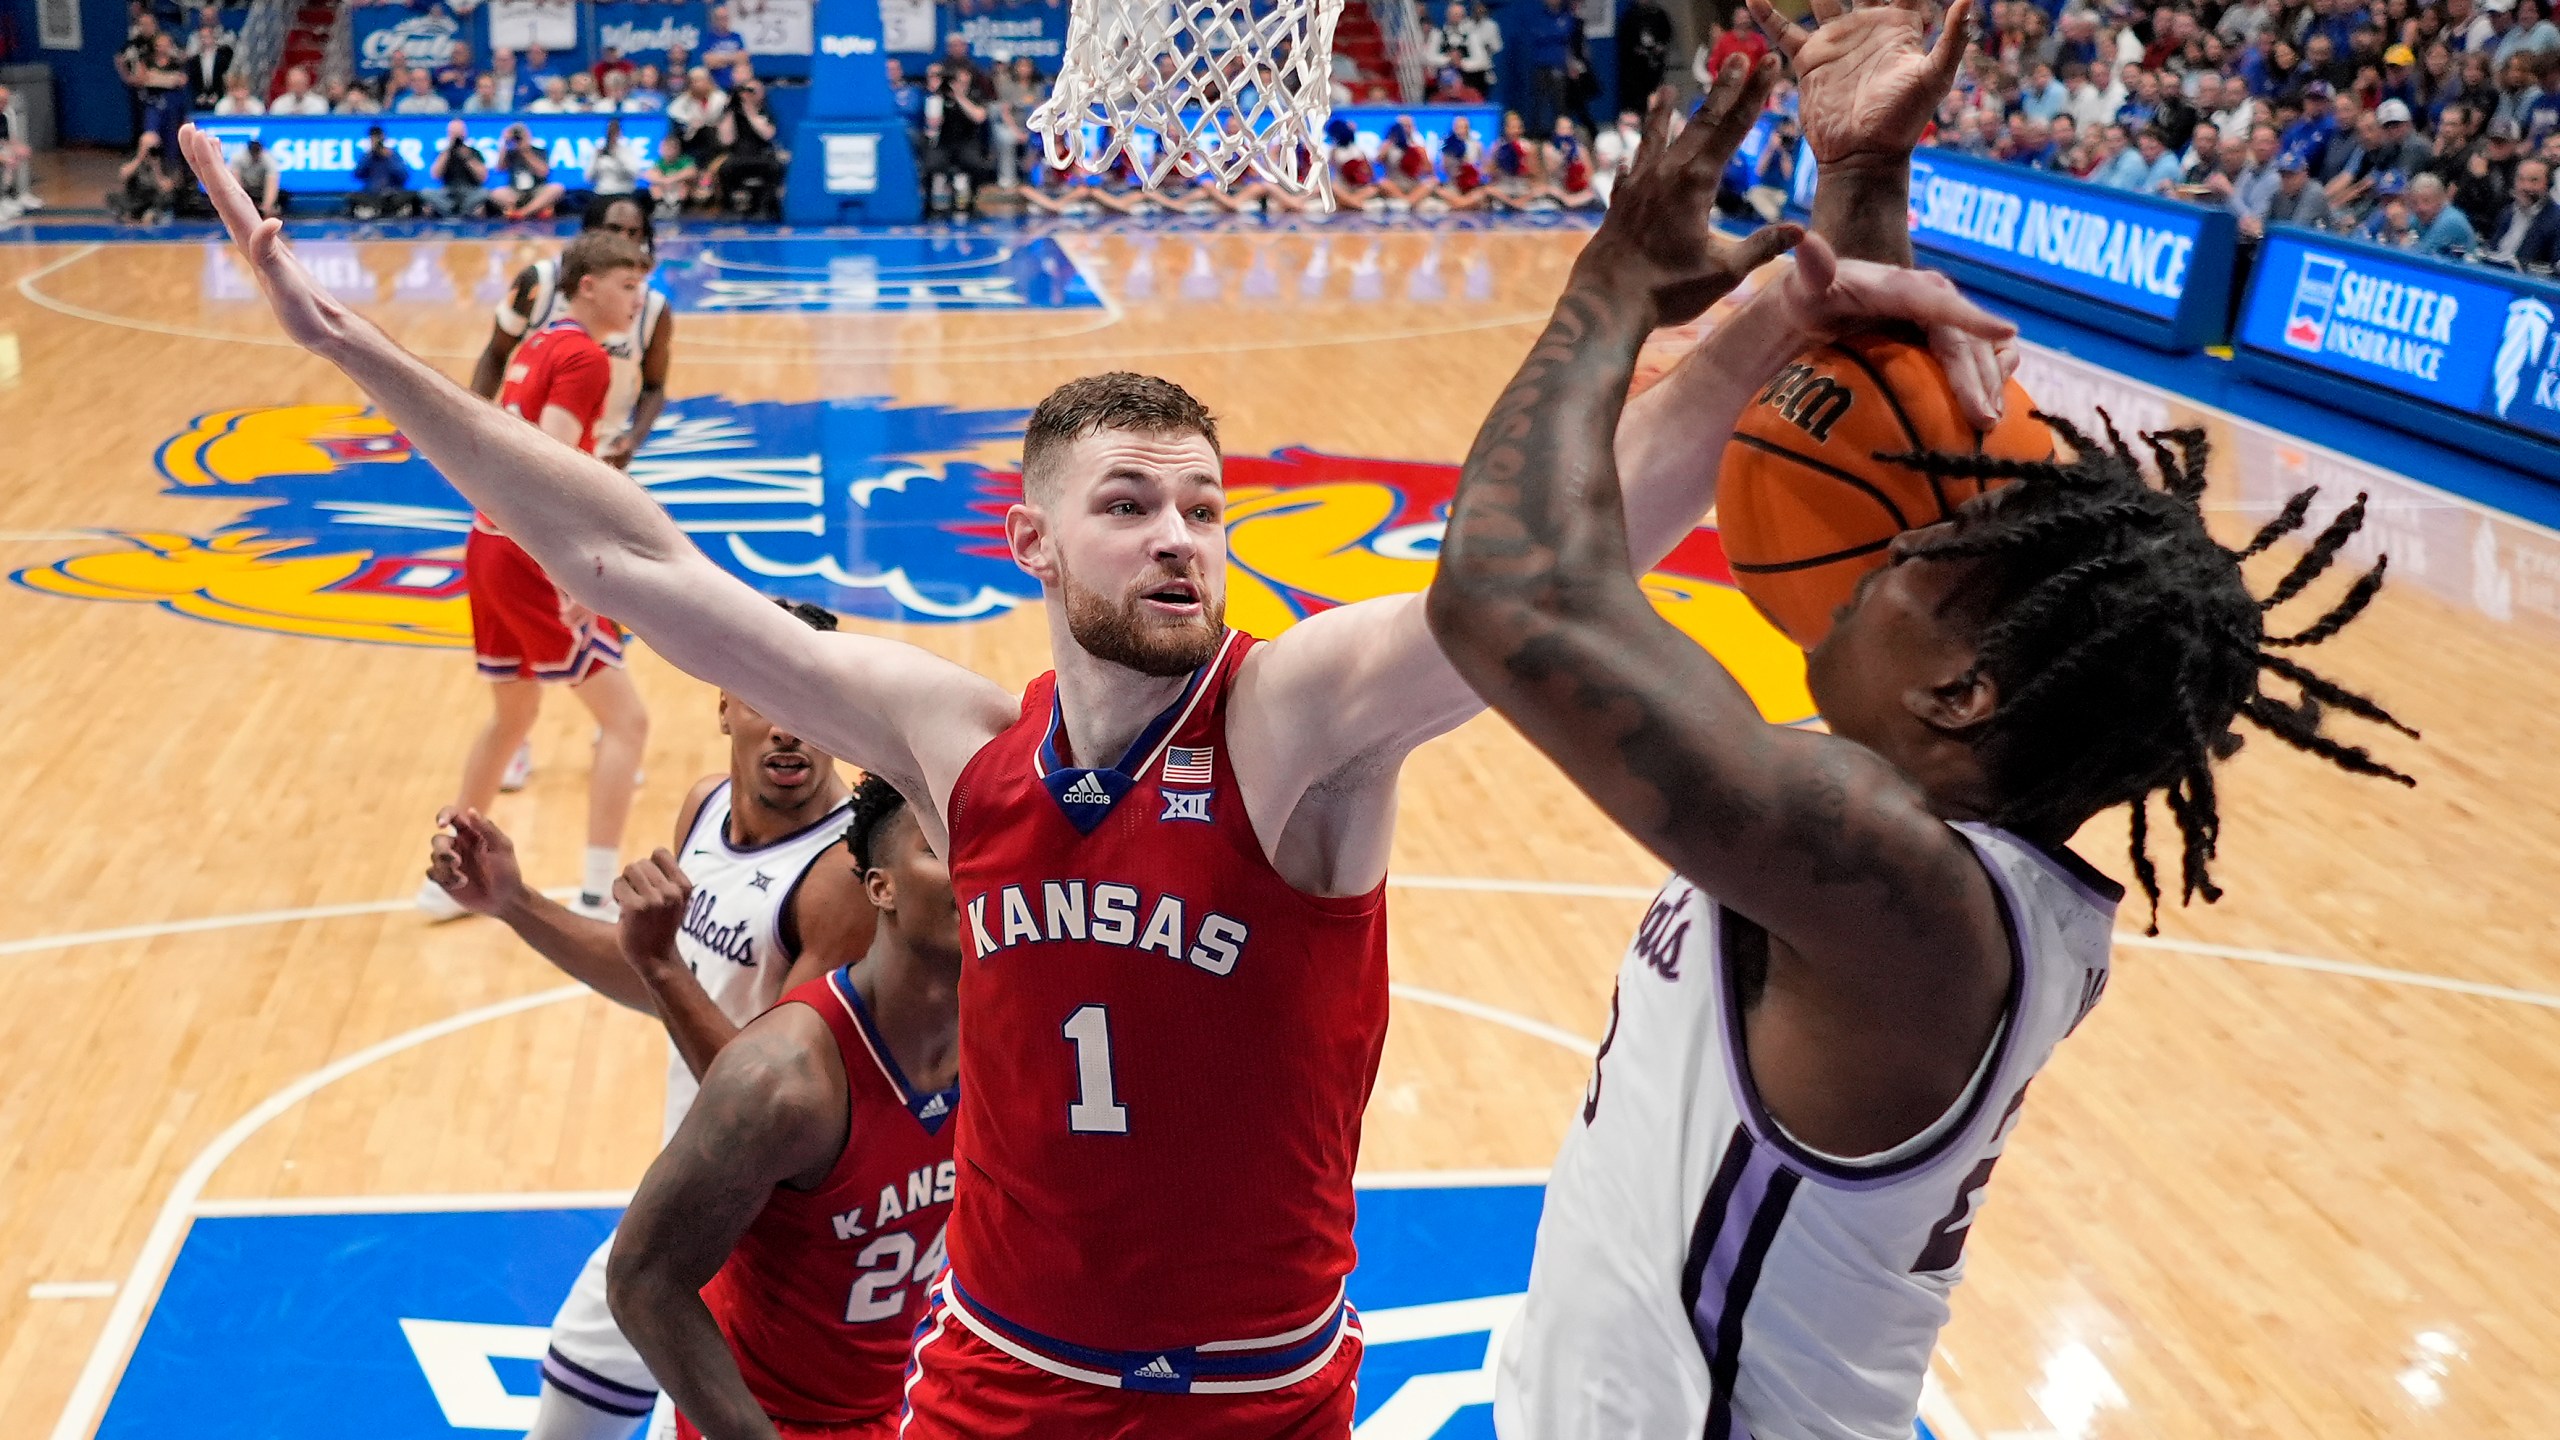 Kansas center Hunter Dickinson (1) knocks the ball away from Kansas State forward Macaleab Rich during the second half of an NCAA college basketball game Tuesday, March 5, 2024, in Lawrence, Kan. Kansas won 90-68. (AP Photo/Charlie Riedel)